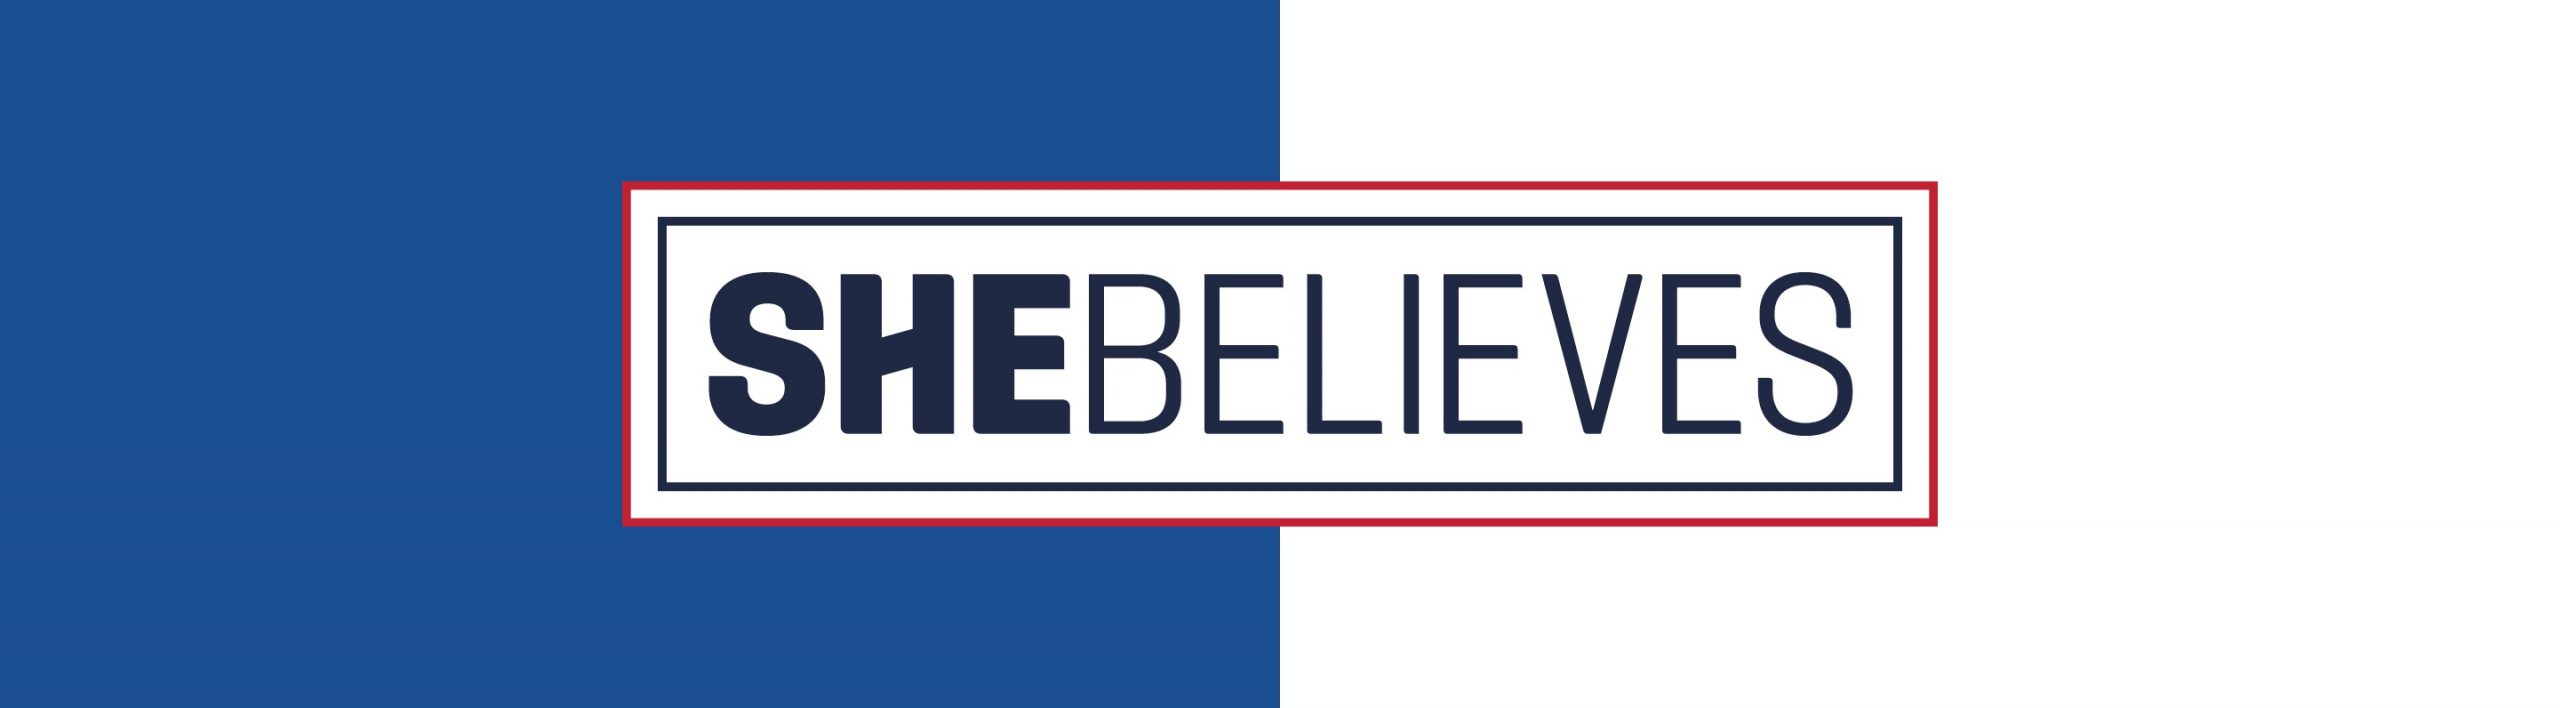 SheBelieves Internship – Last Chance to Apply!